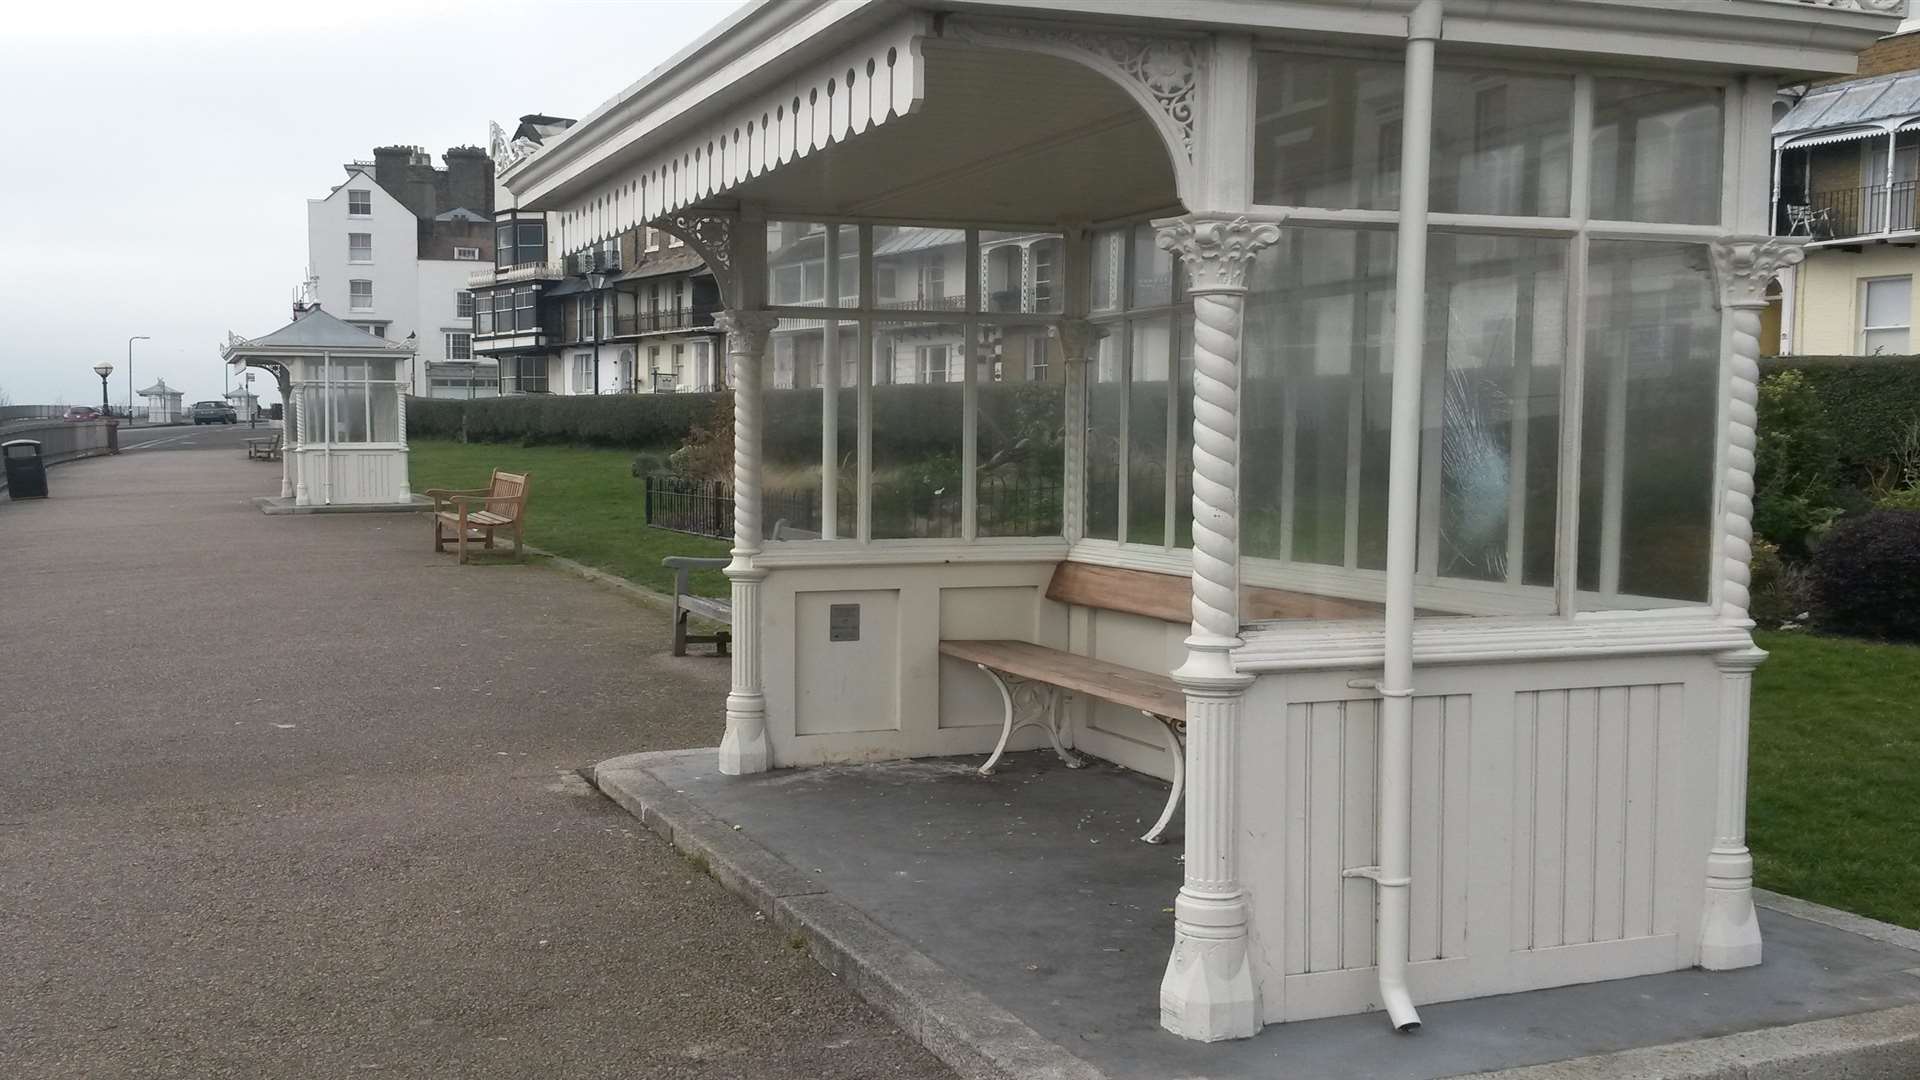 The Ramsgate Society wants to protect the promenade shelters